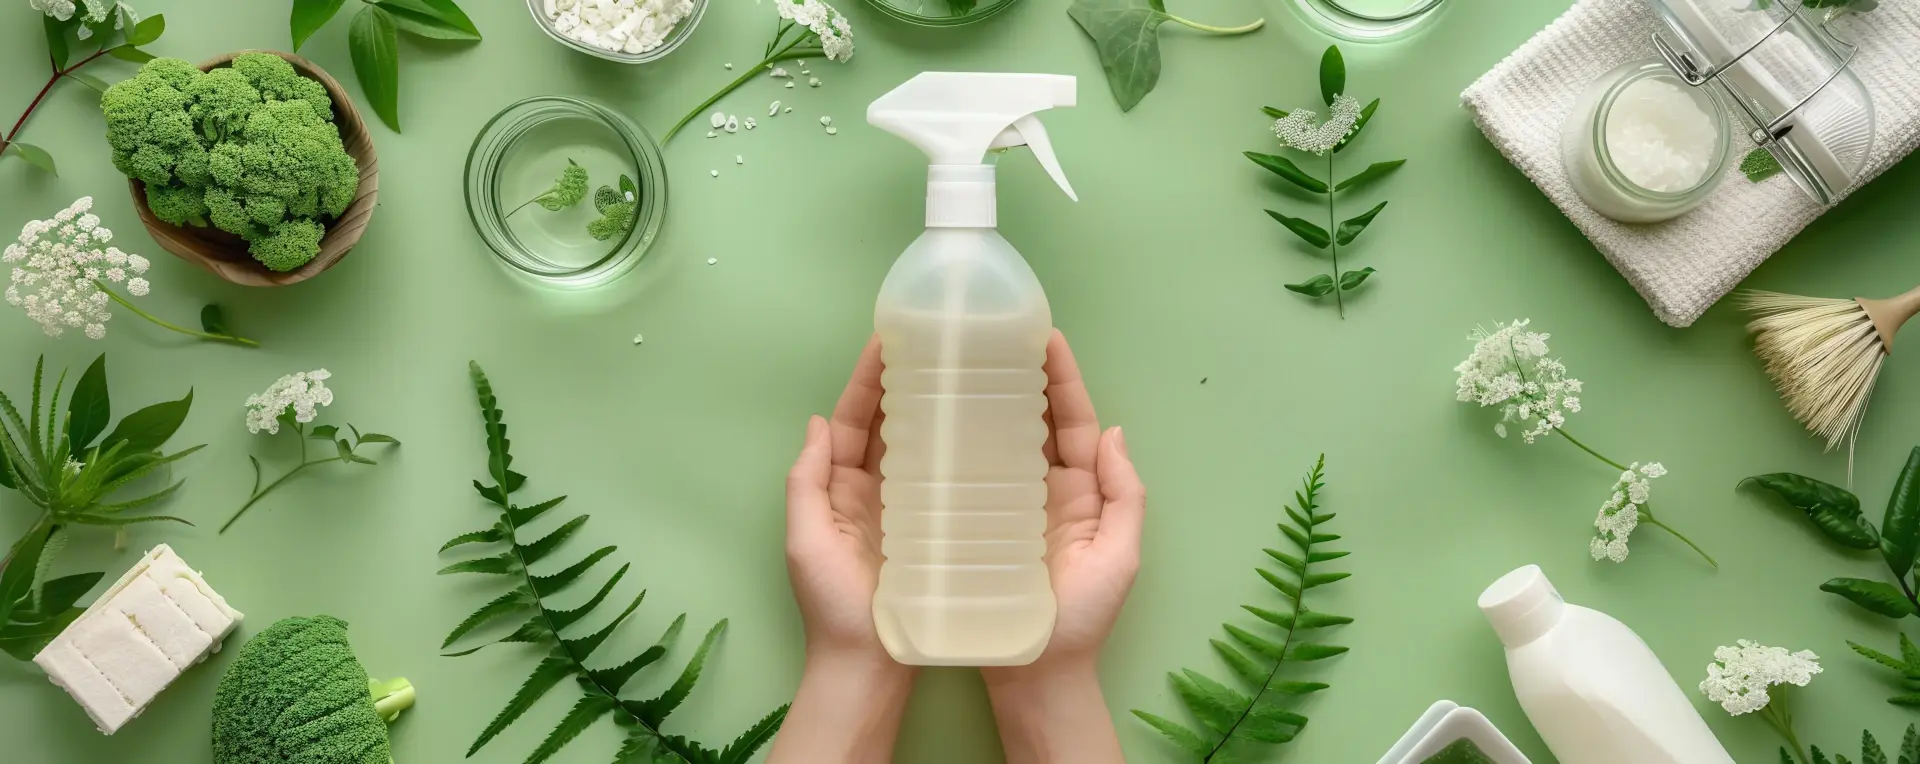 Greener Cleaning with An Ecolabel